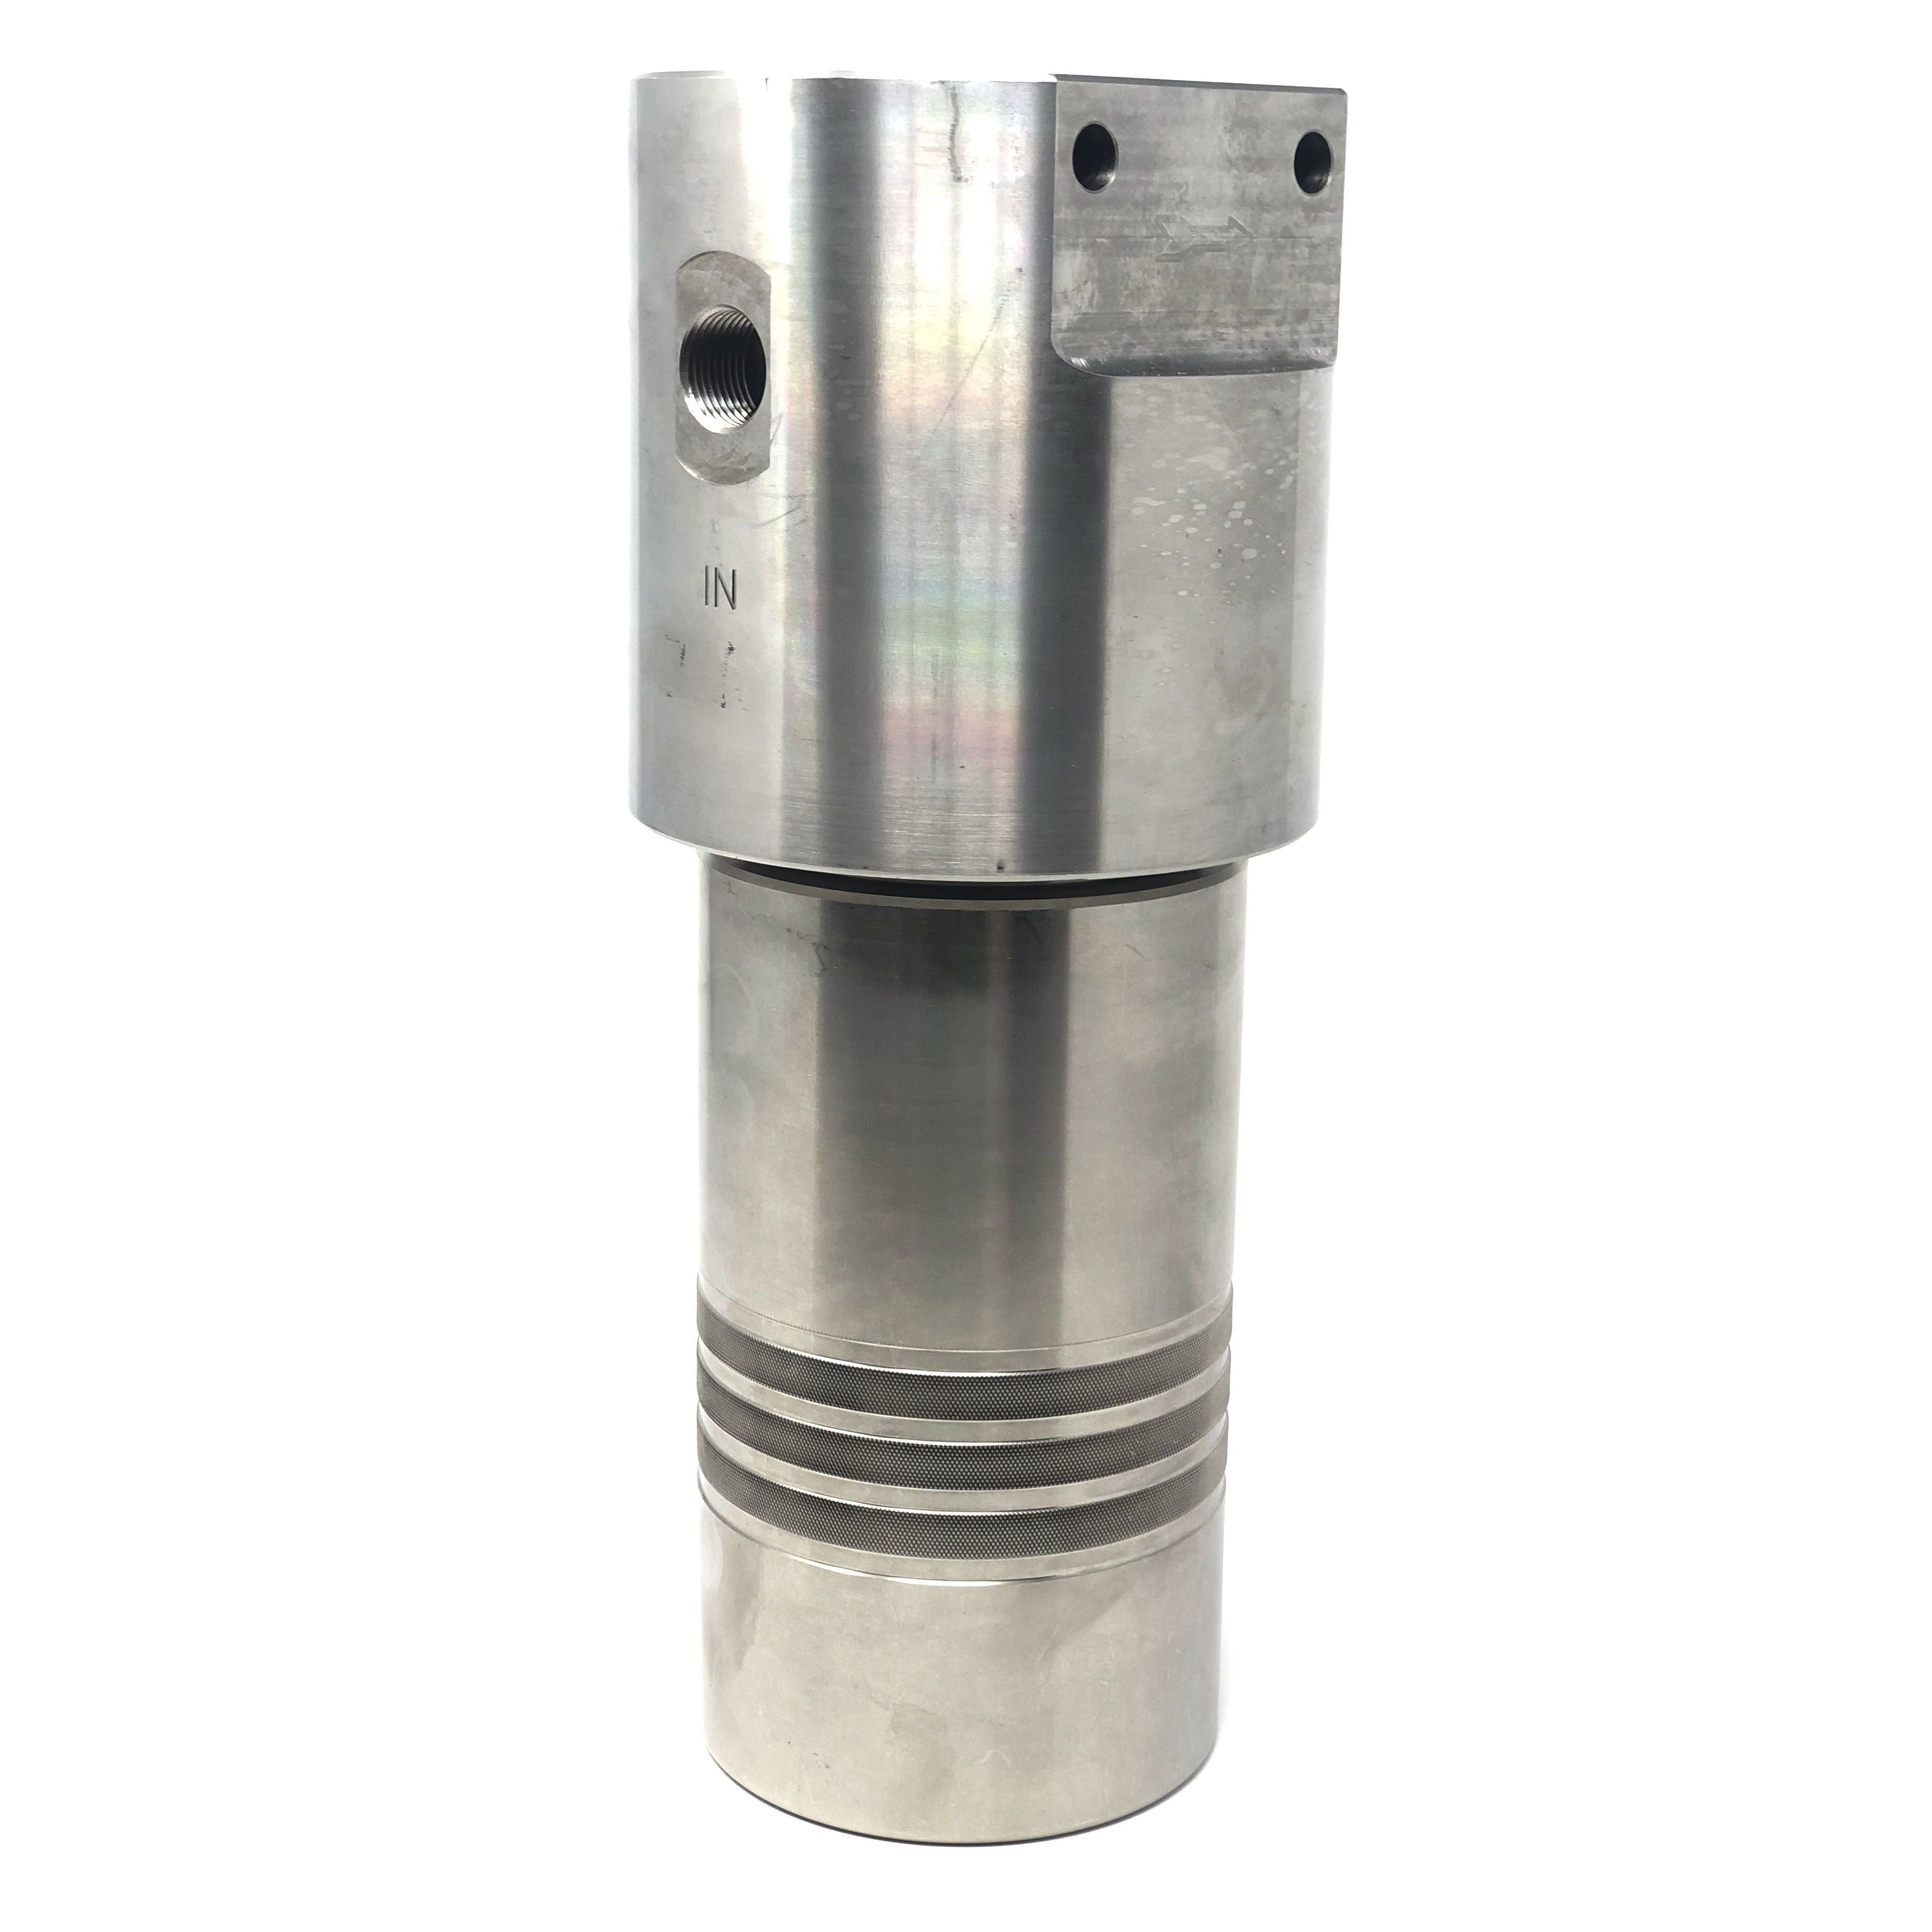 52S-246N-40SEN : Chase Ultra High Pressure Inline Filter, 10000psi, 3/8" NPT, 40 Micron, With Visual Indicator, No Bypass